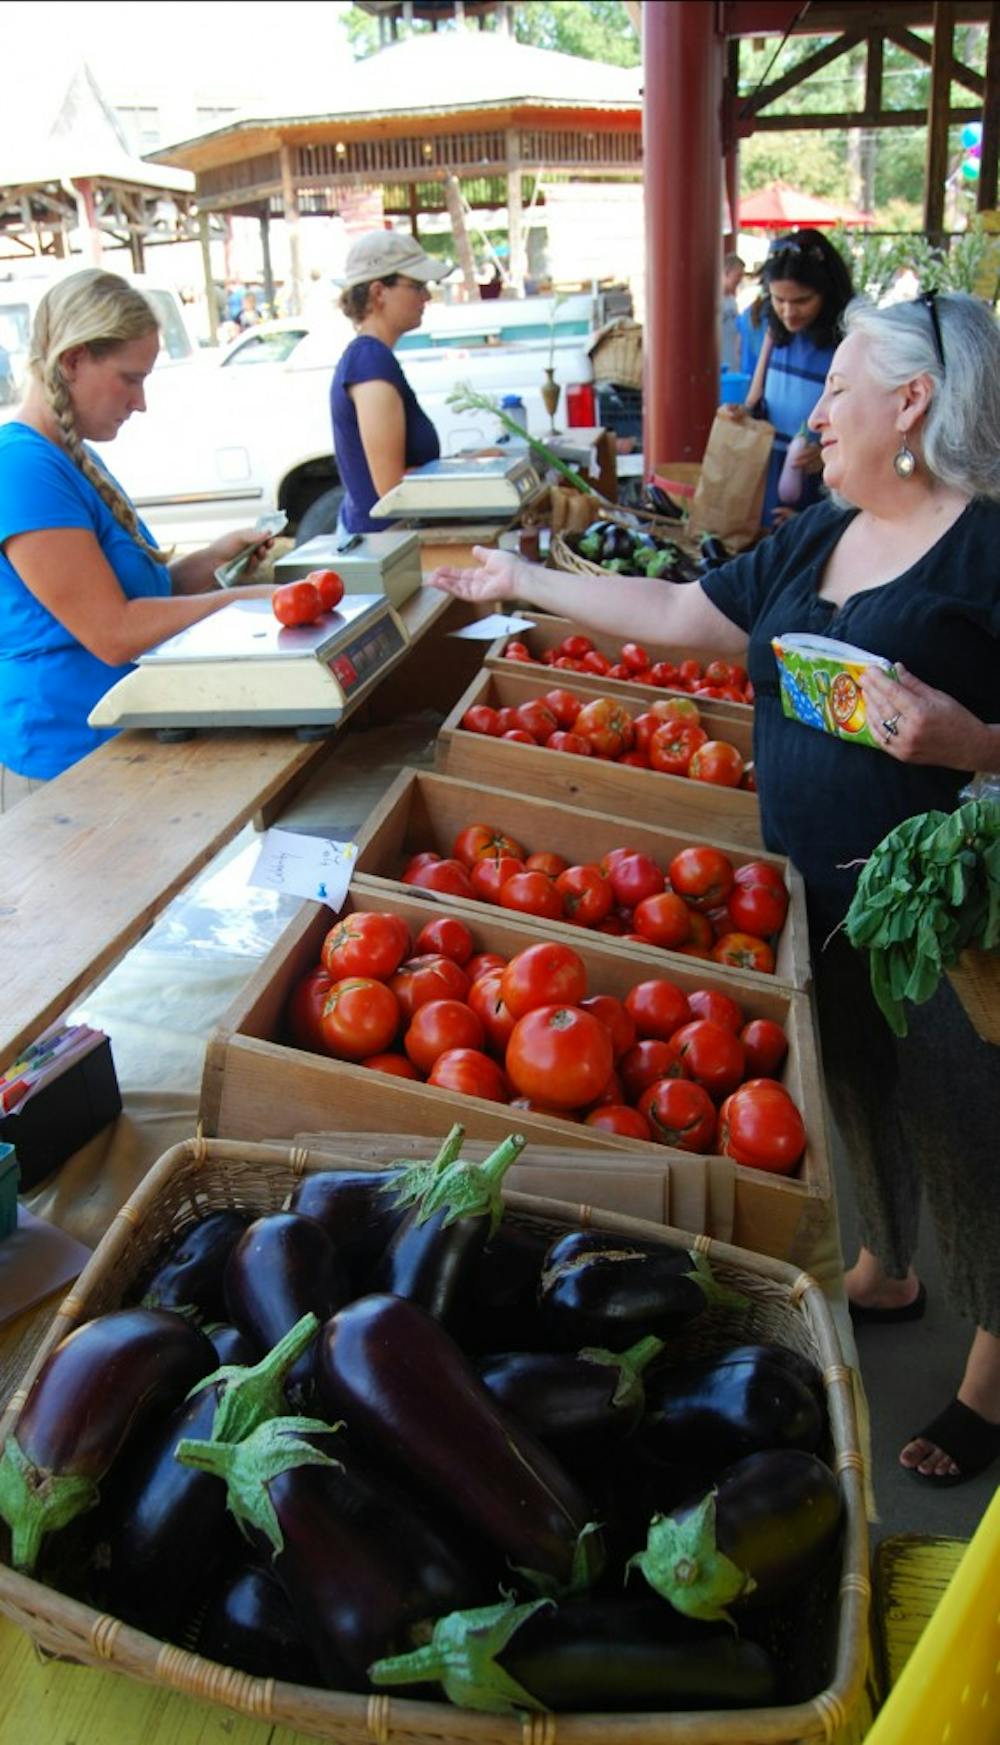 Megan Cornett, an employee with Maple Spring Gardens in Cedar Grove, N.C., sells fresh tomatoes to a customer on Saturday morning. Maple Spring Gardens is one of the vendors that participated in the donation program to help homeless shelters and the needy, the Triangle Foodshare Challenge.
